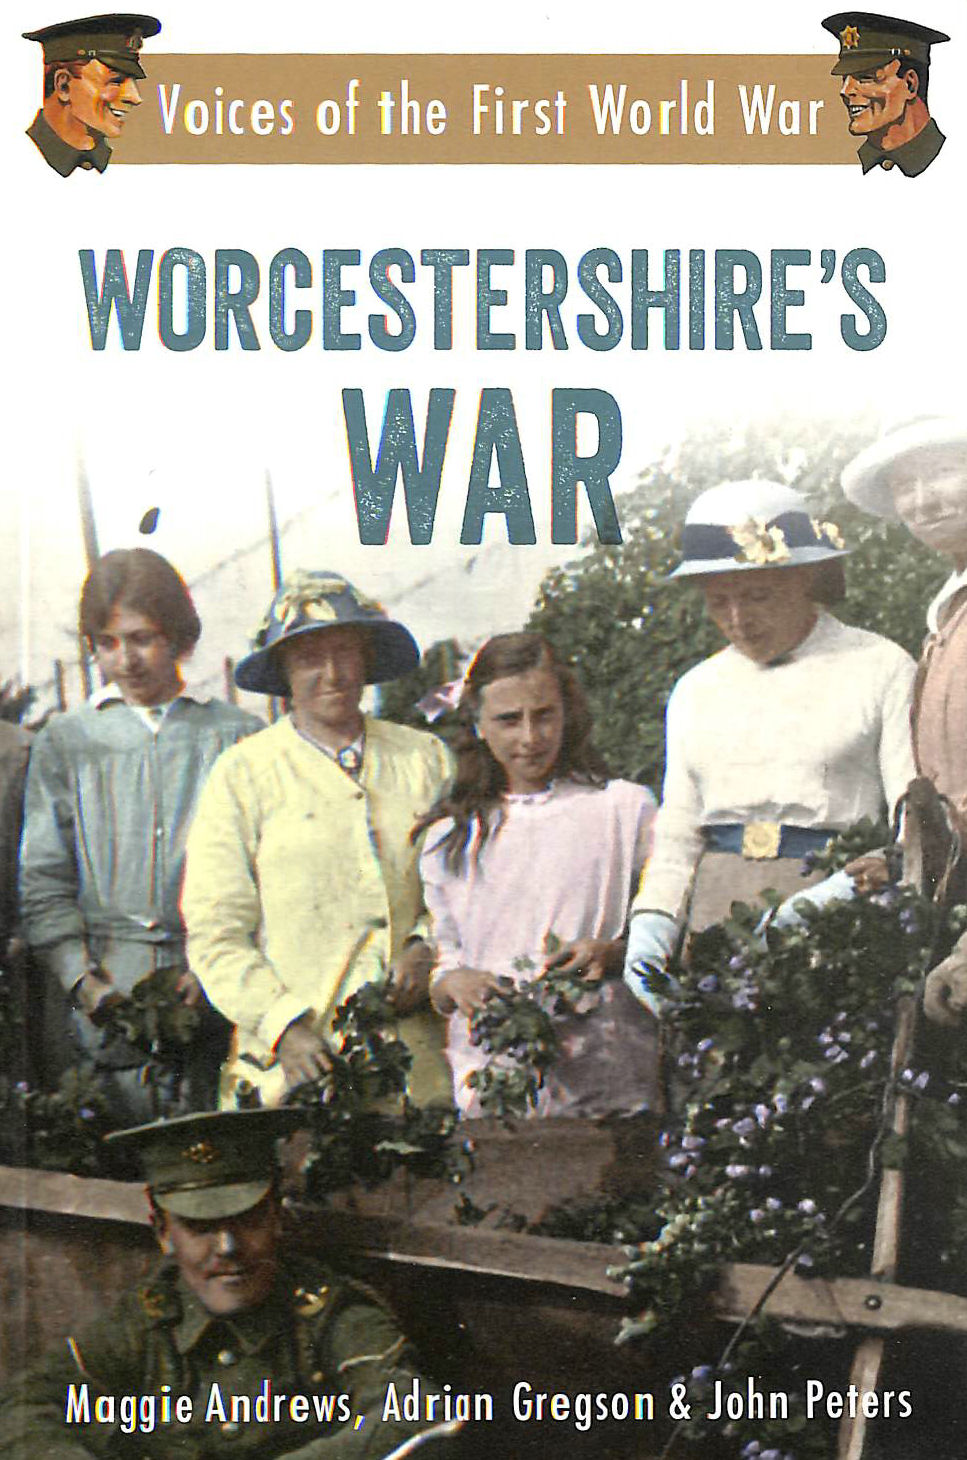 ANDREWS, MAGGIE; GREGSON, ADRIAN; PETERS, JOHN - Worcestershire's War: Voices of the First World War